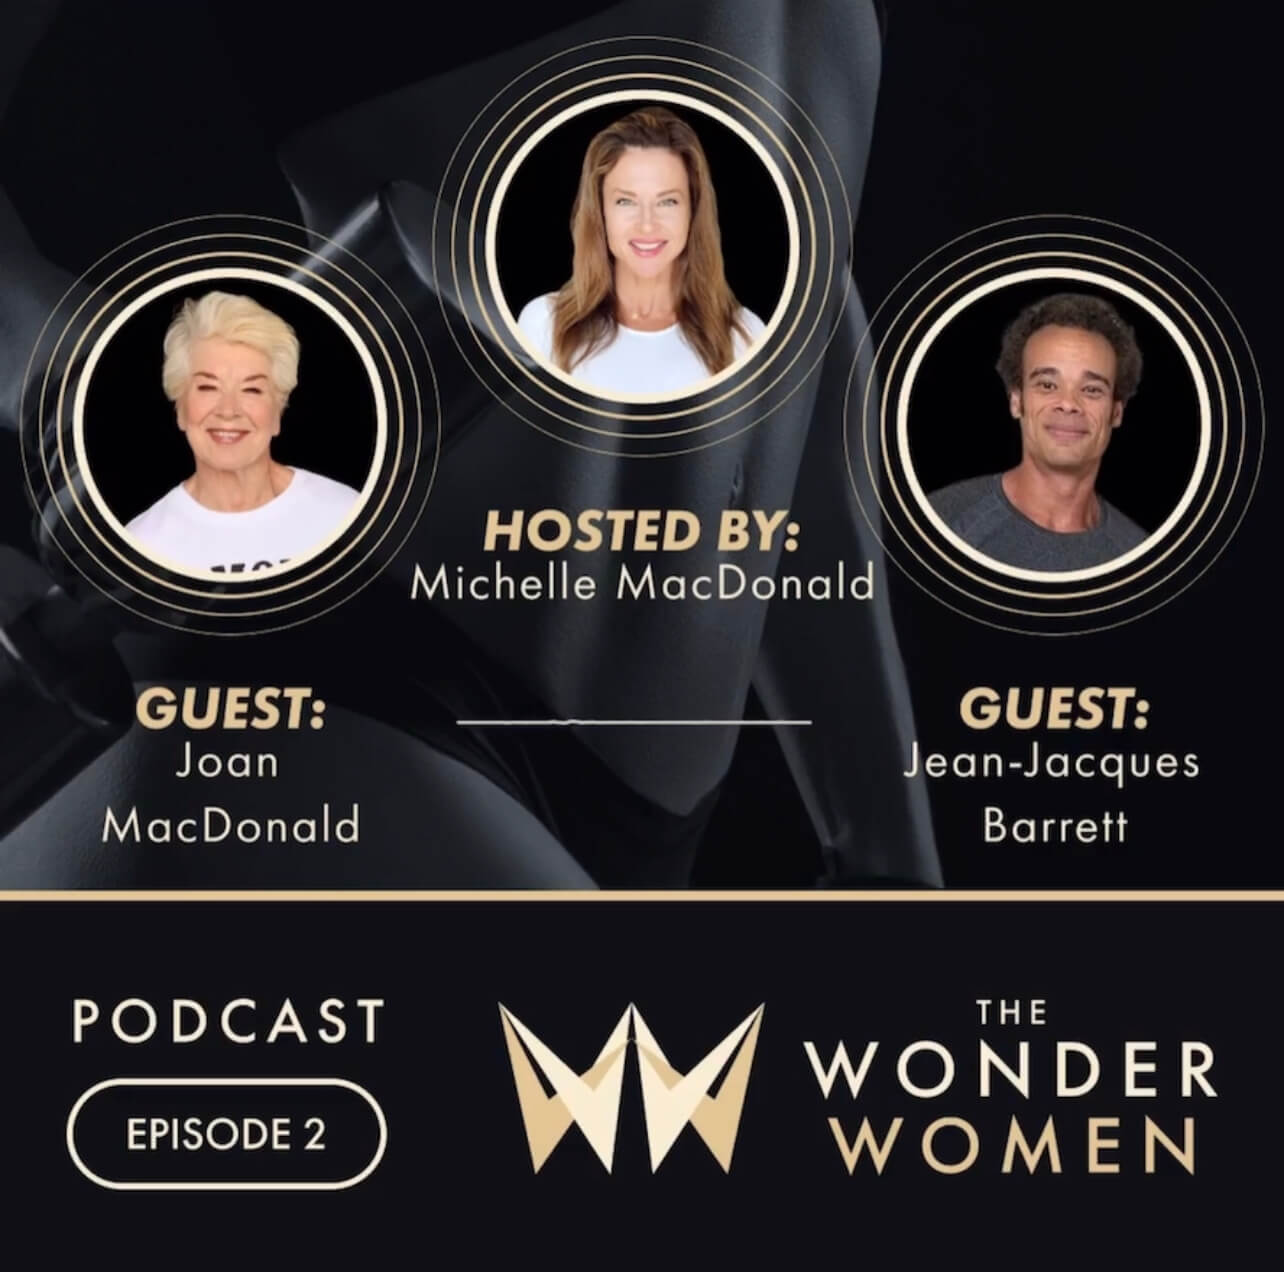 The Wonder Women podcast episode 2 with Joan